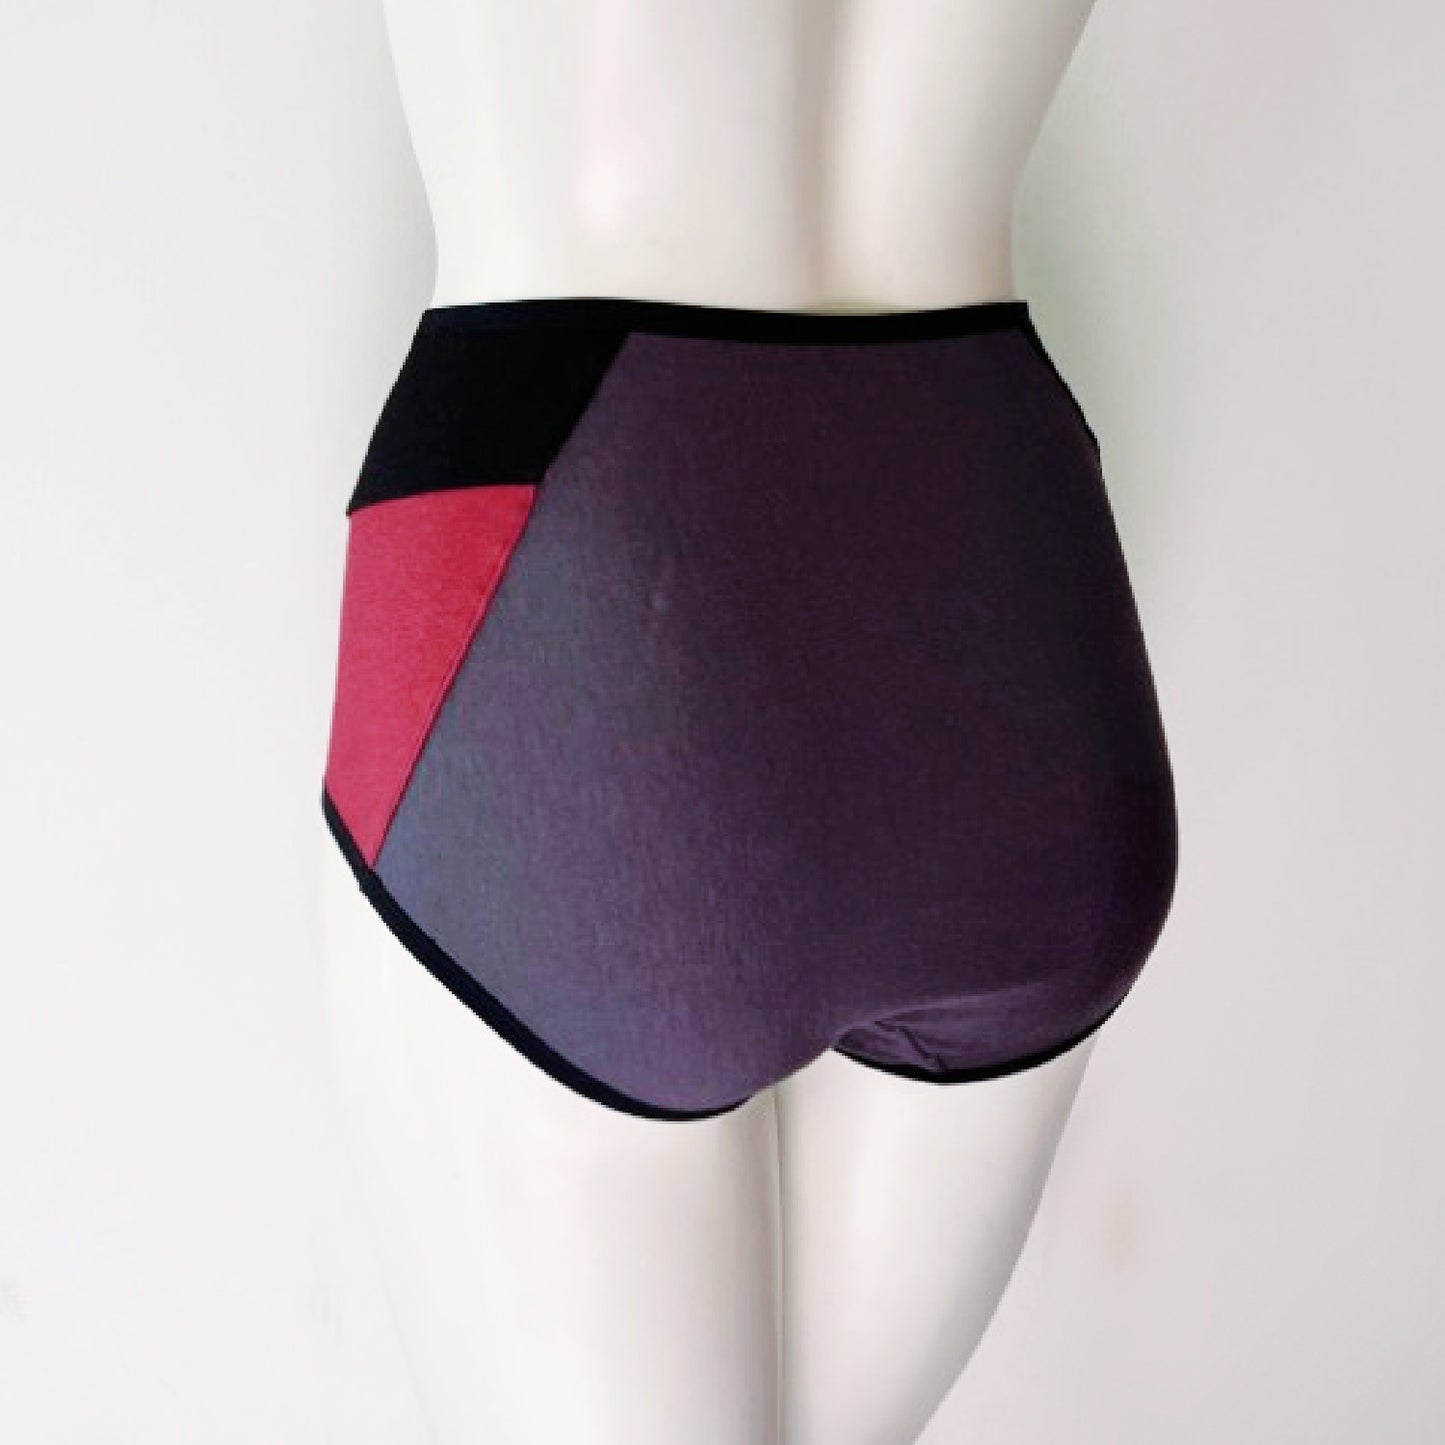 Organic cotton french brief | Made to measure